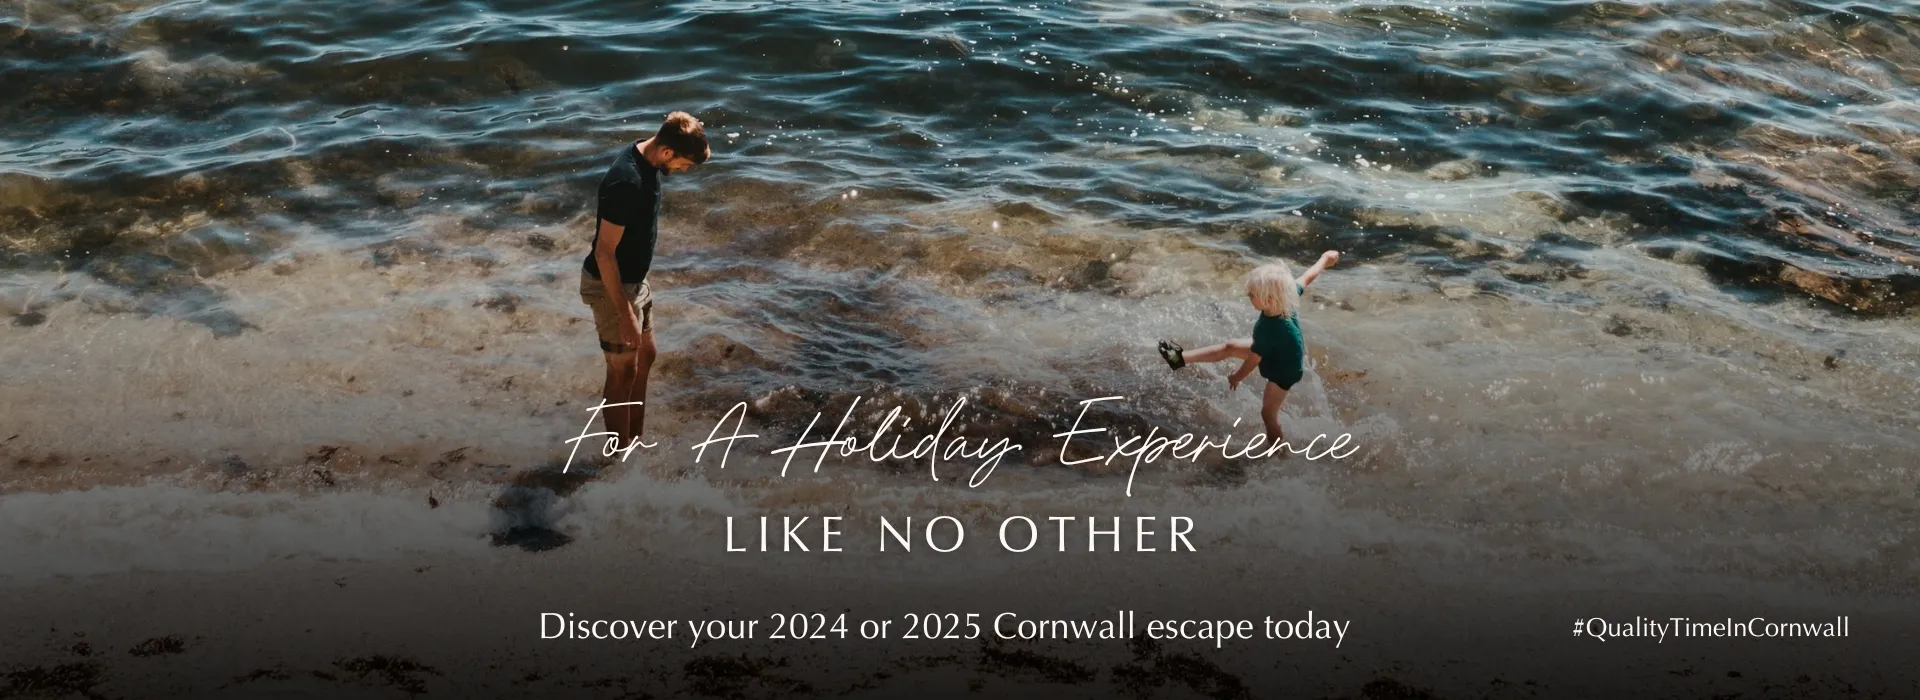 Discover Your 2024 or 2025 Cornwall escape today!